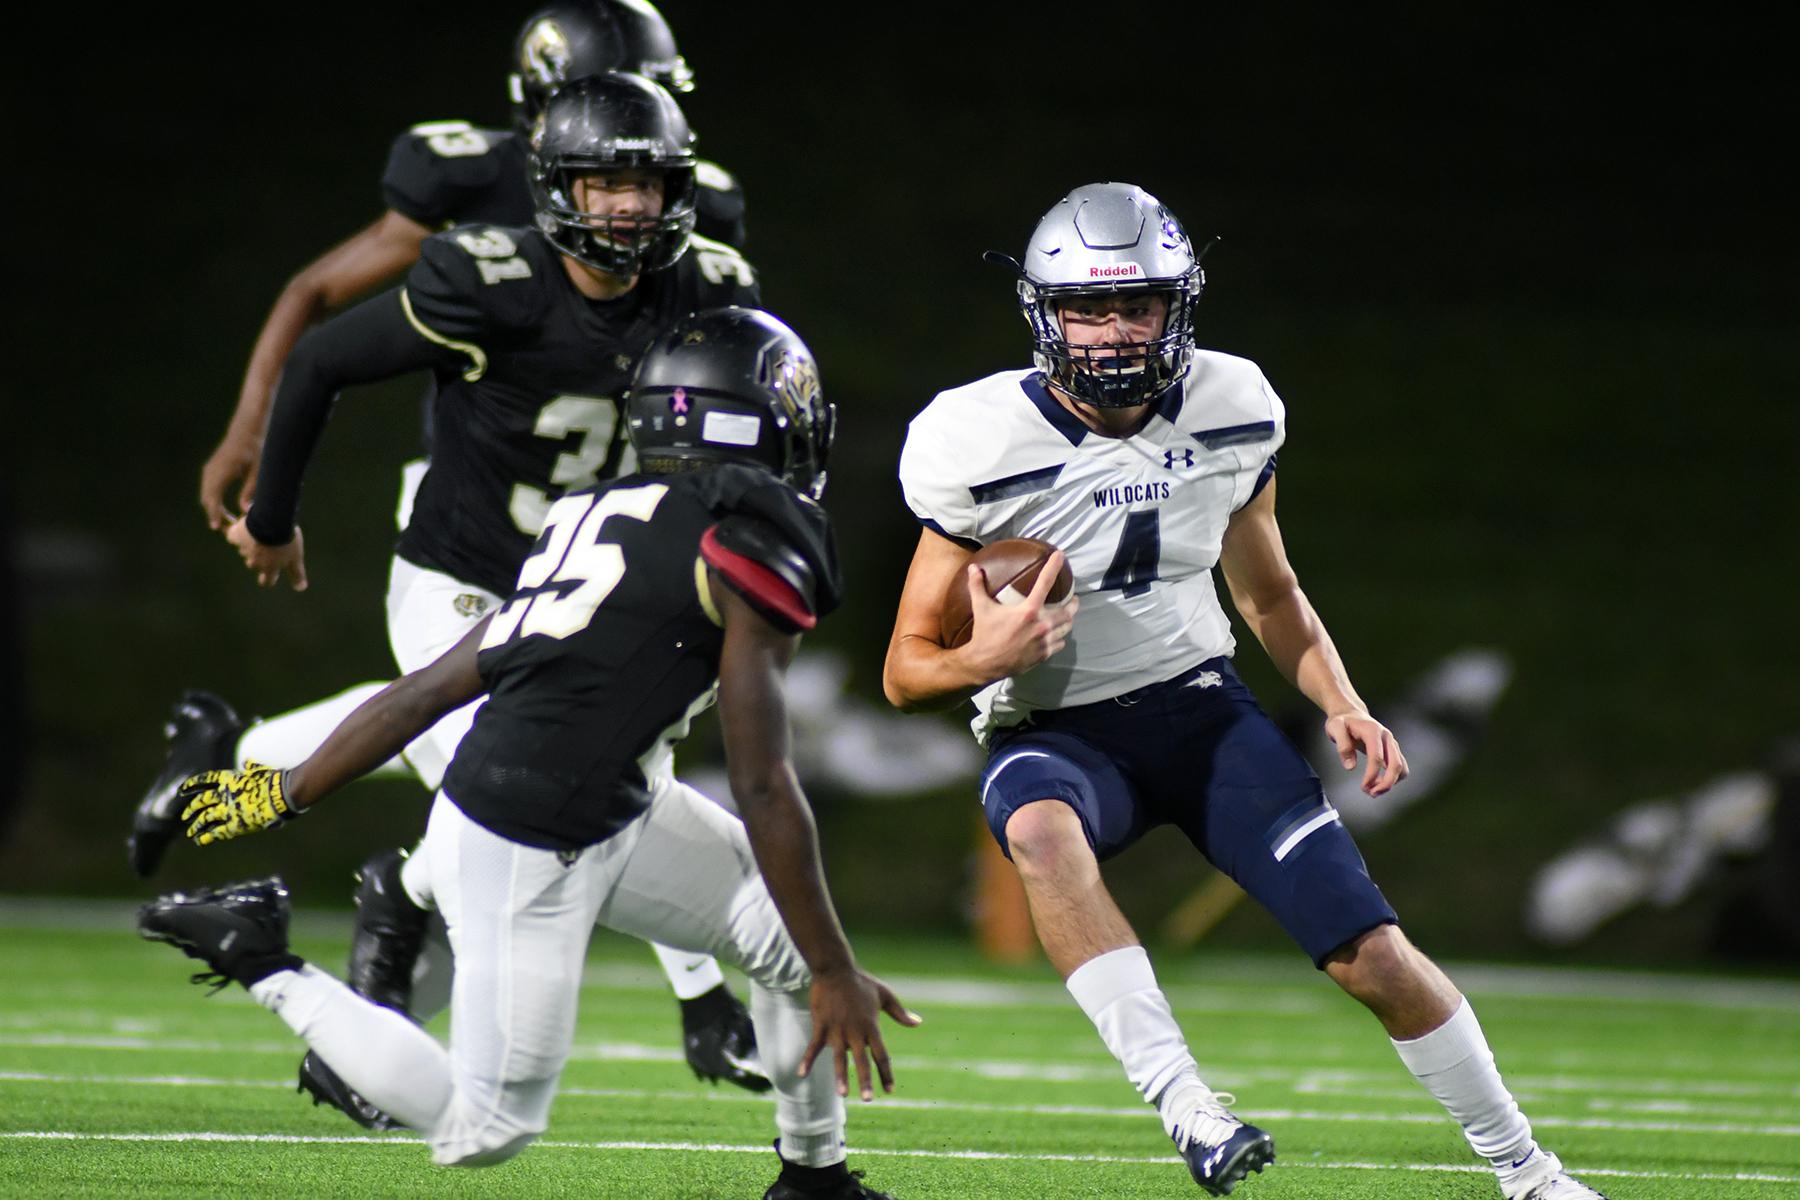 Tomball high school playoff football roundup: Tomball Memorial closes